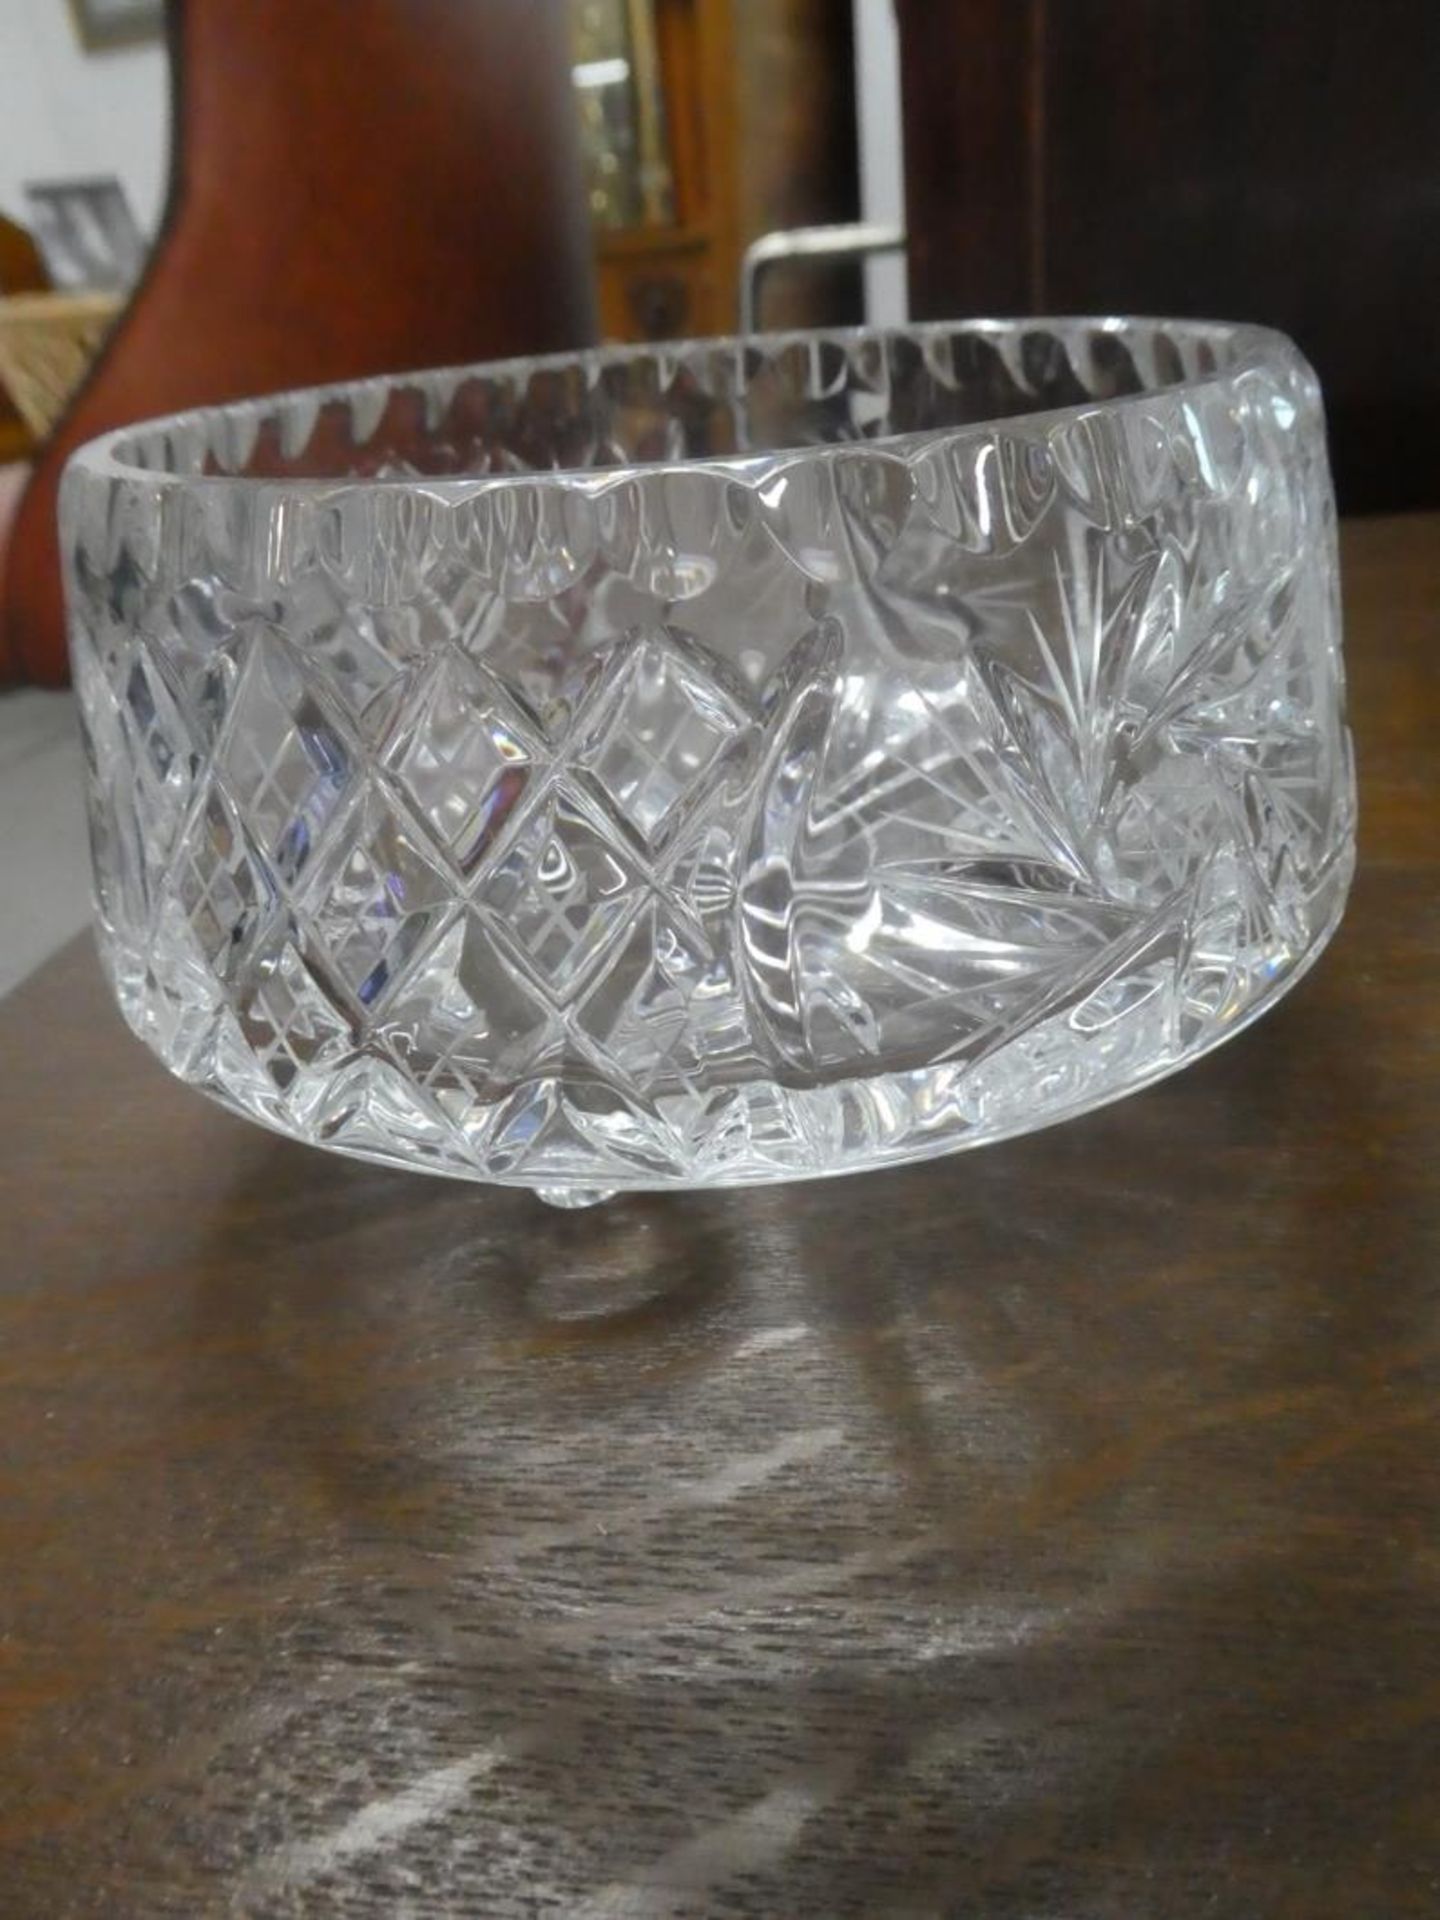 1 CYSTAL FOOTED BOWL 8" & 1 CYSTAL FOOTED BOWL 4" - Image 3 of 4